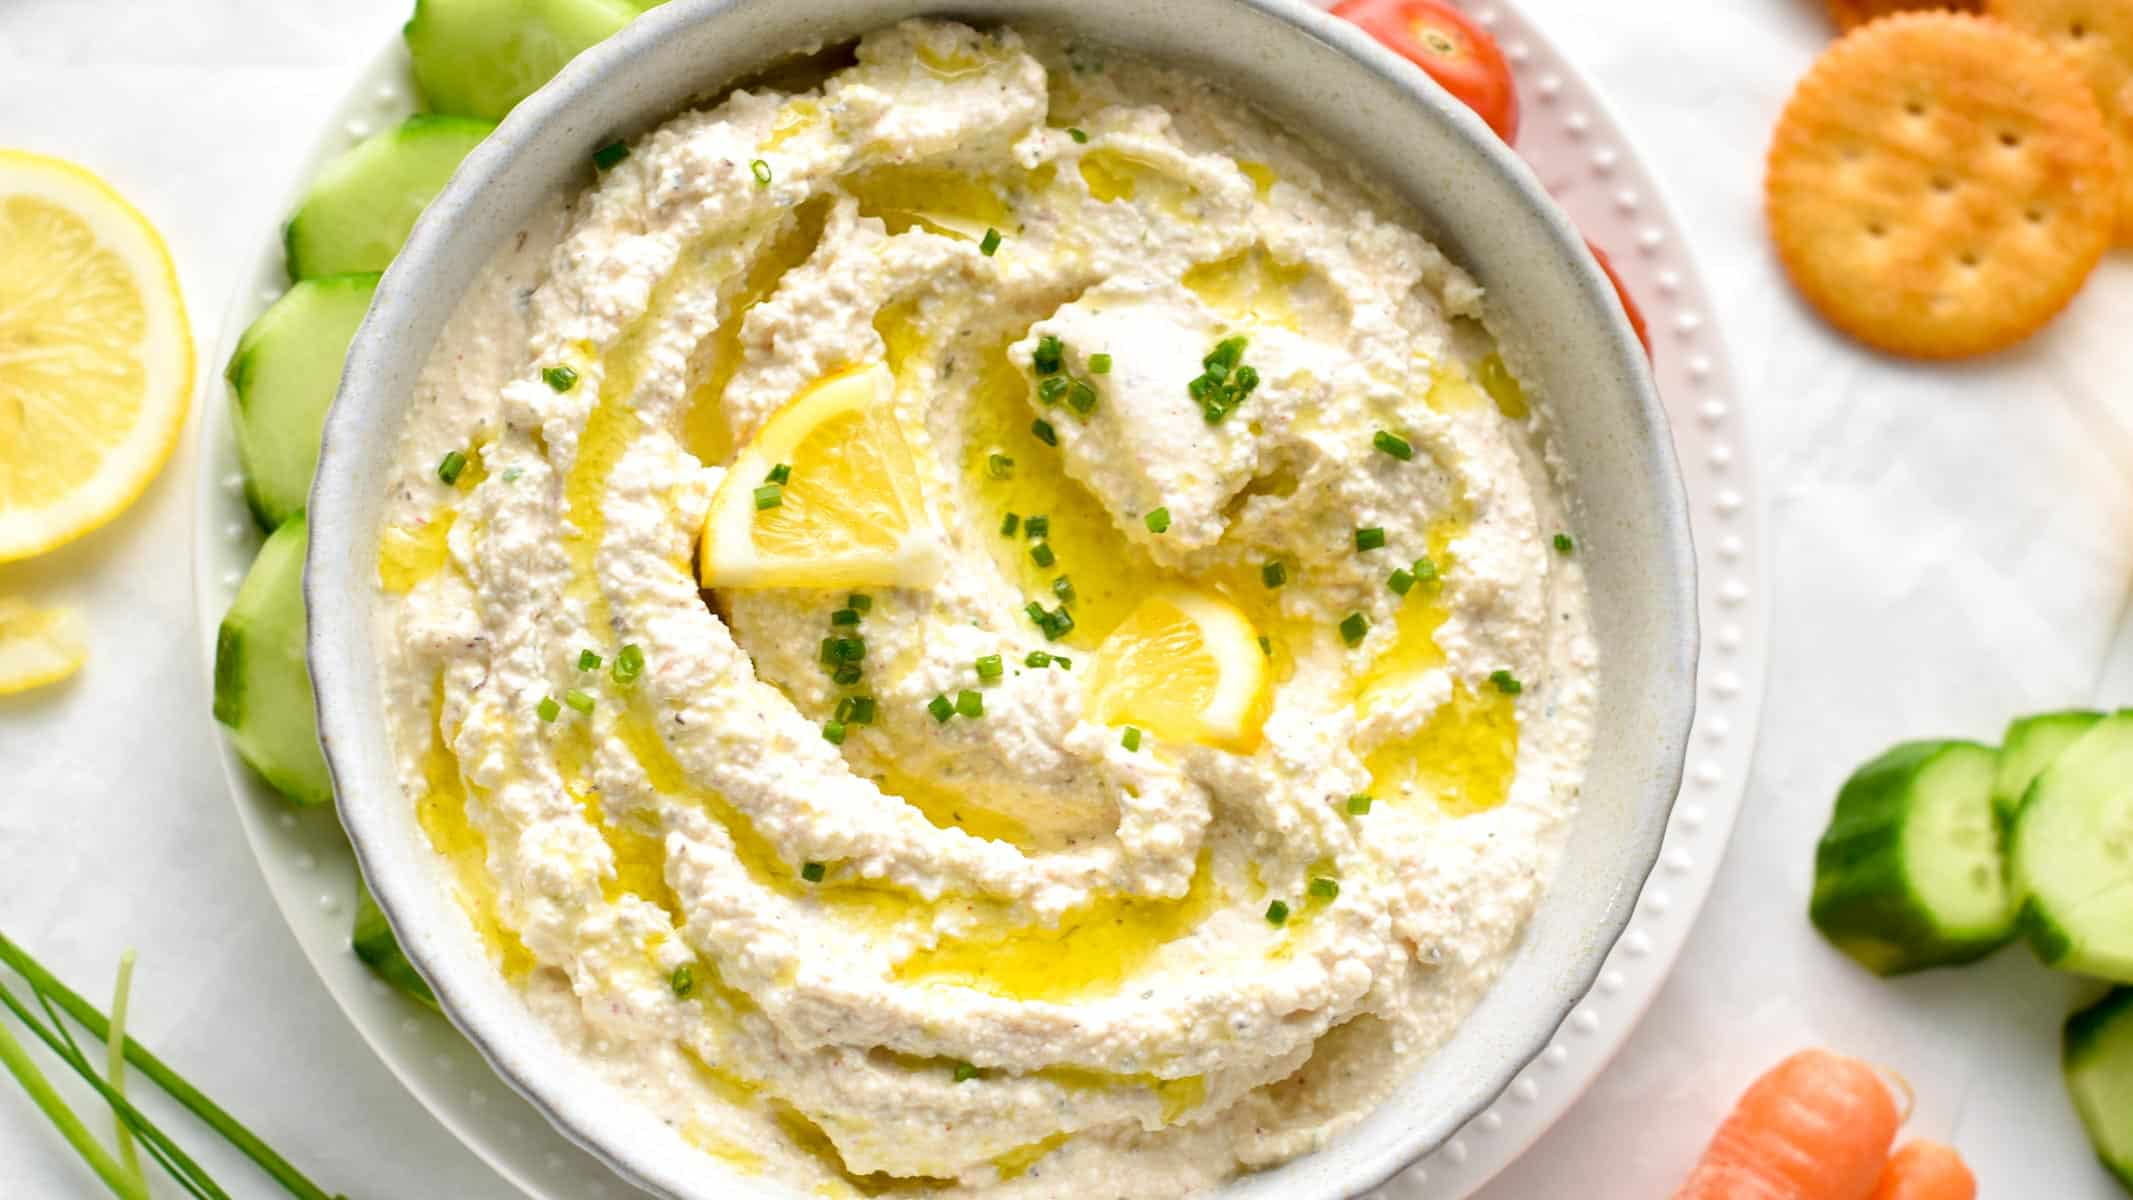 Served cottage cheese dip in a large bowl.